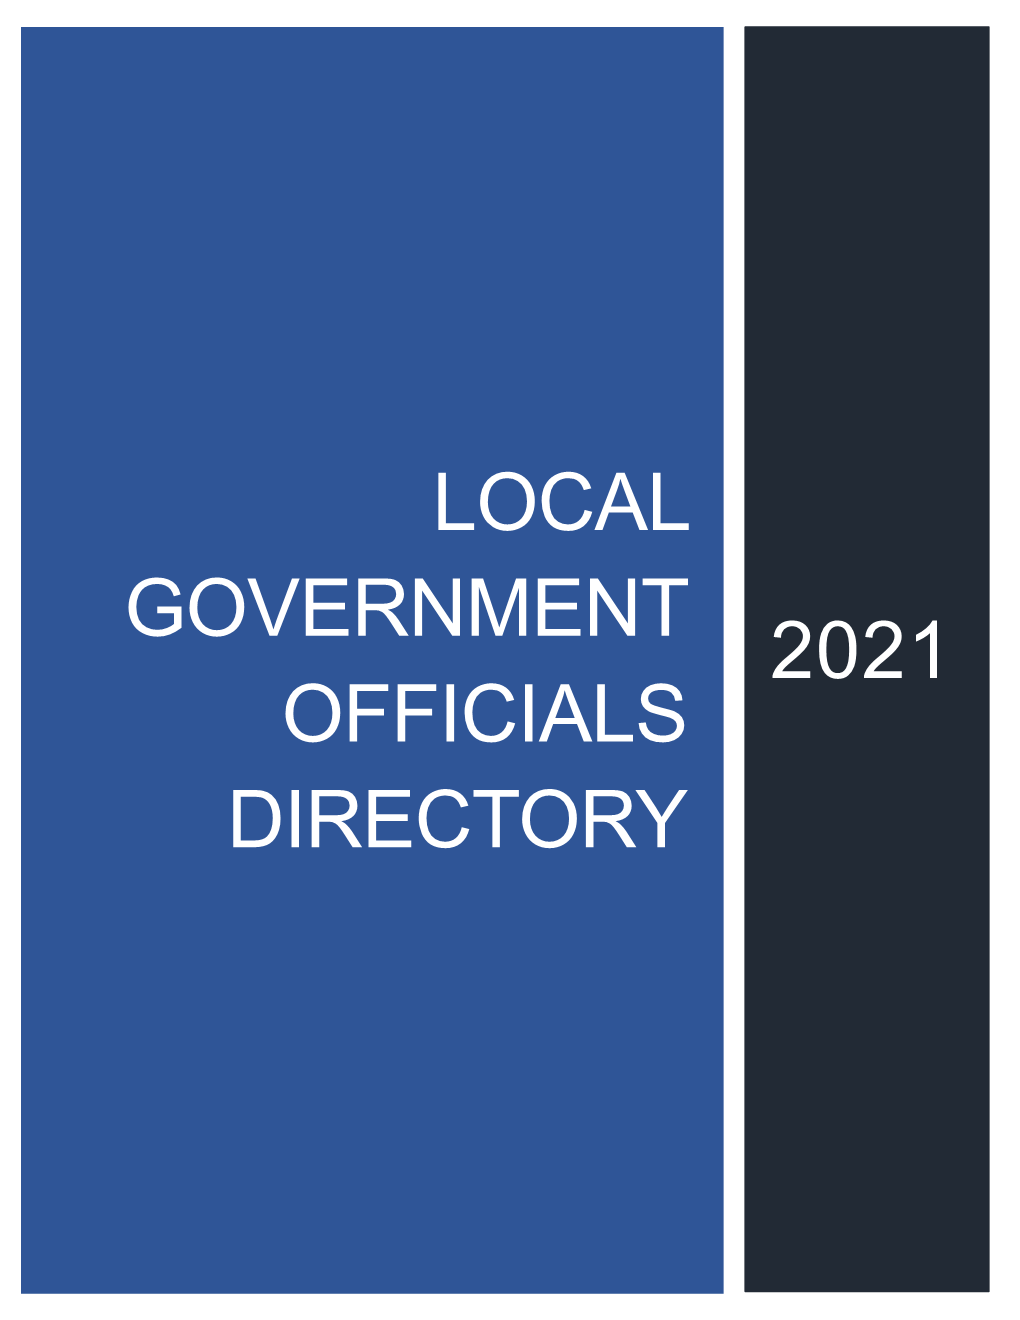 Local Government Officials Directory